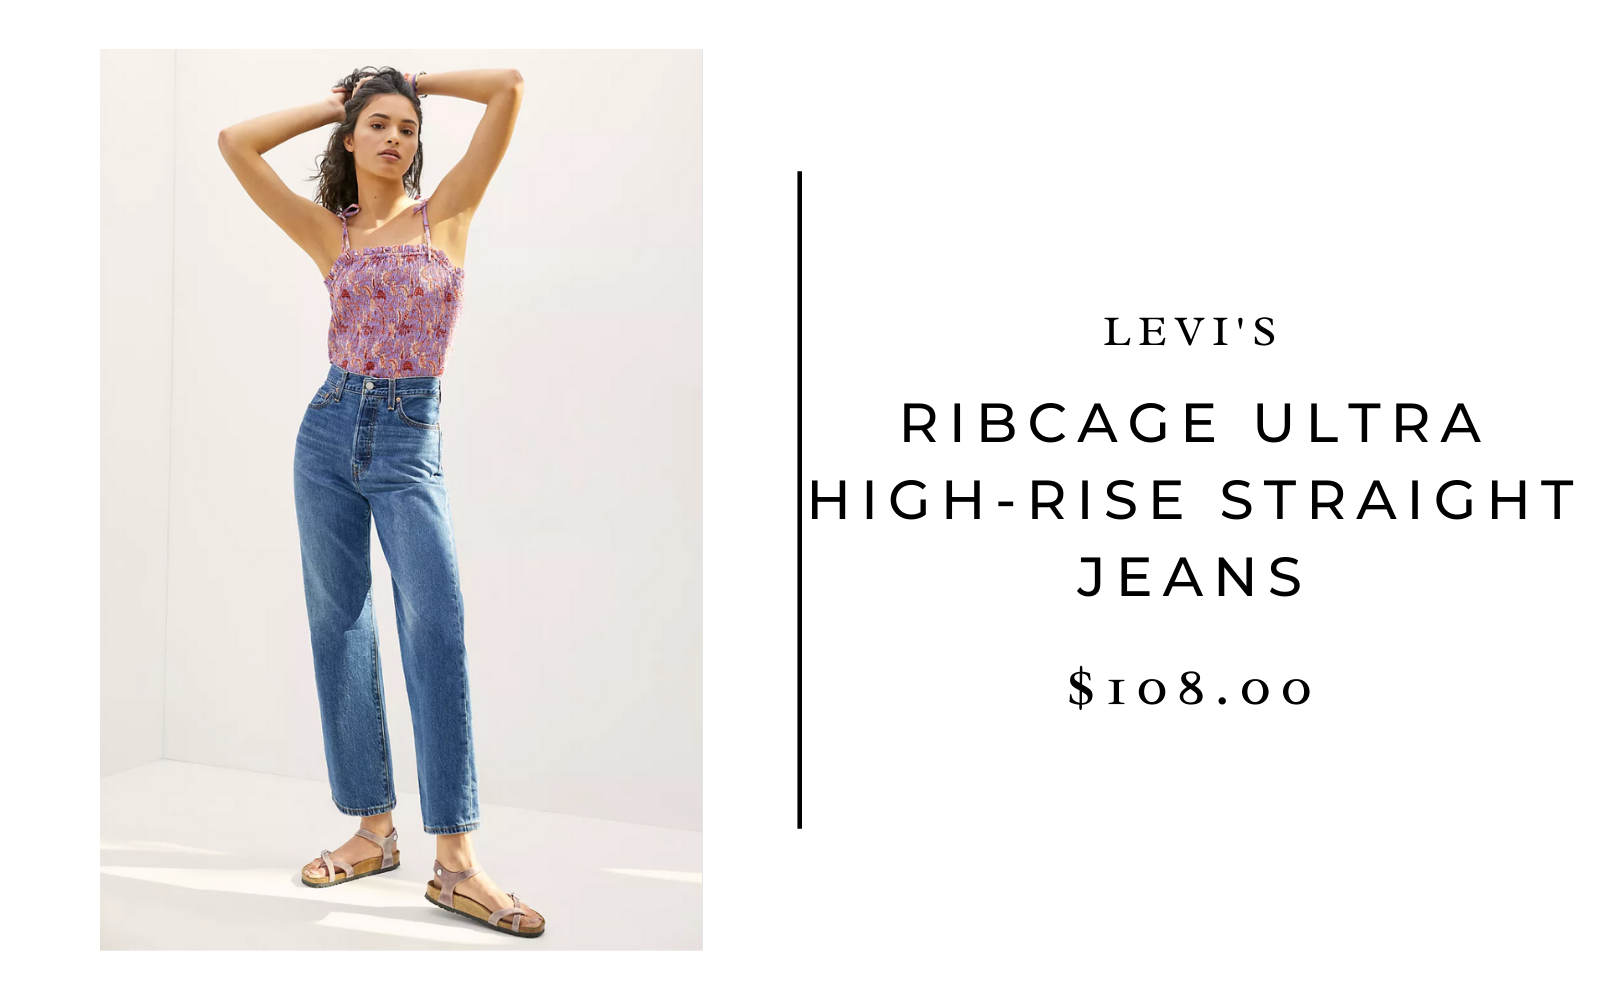 Levi's Ribcage Ultra High-Rise Straight Jeans